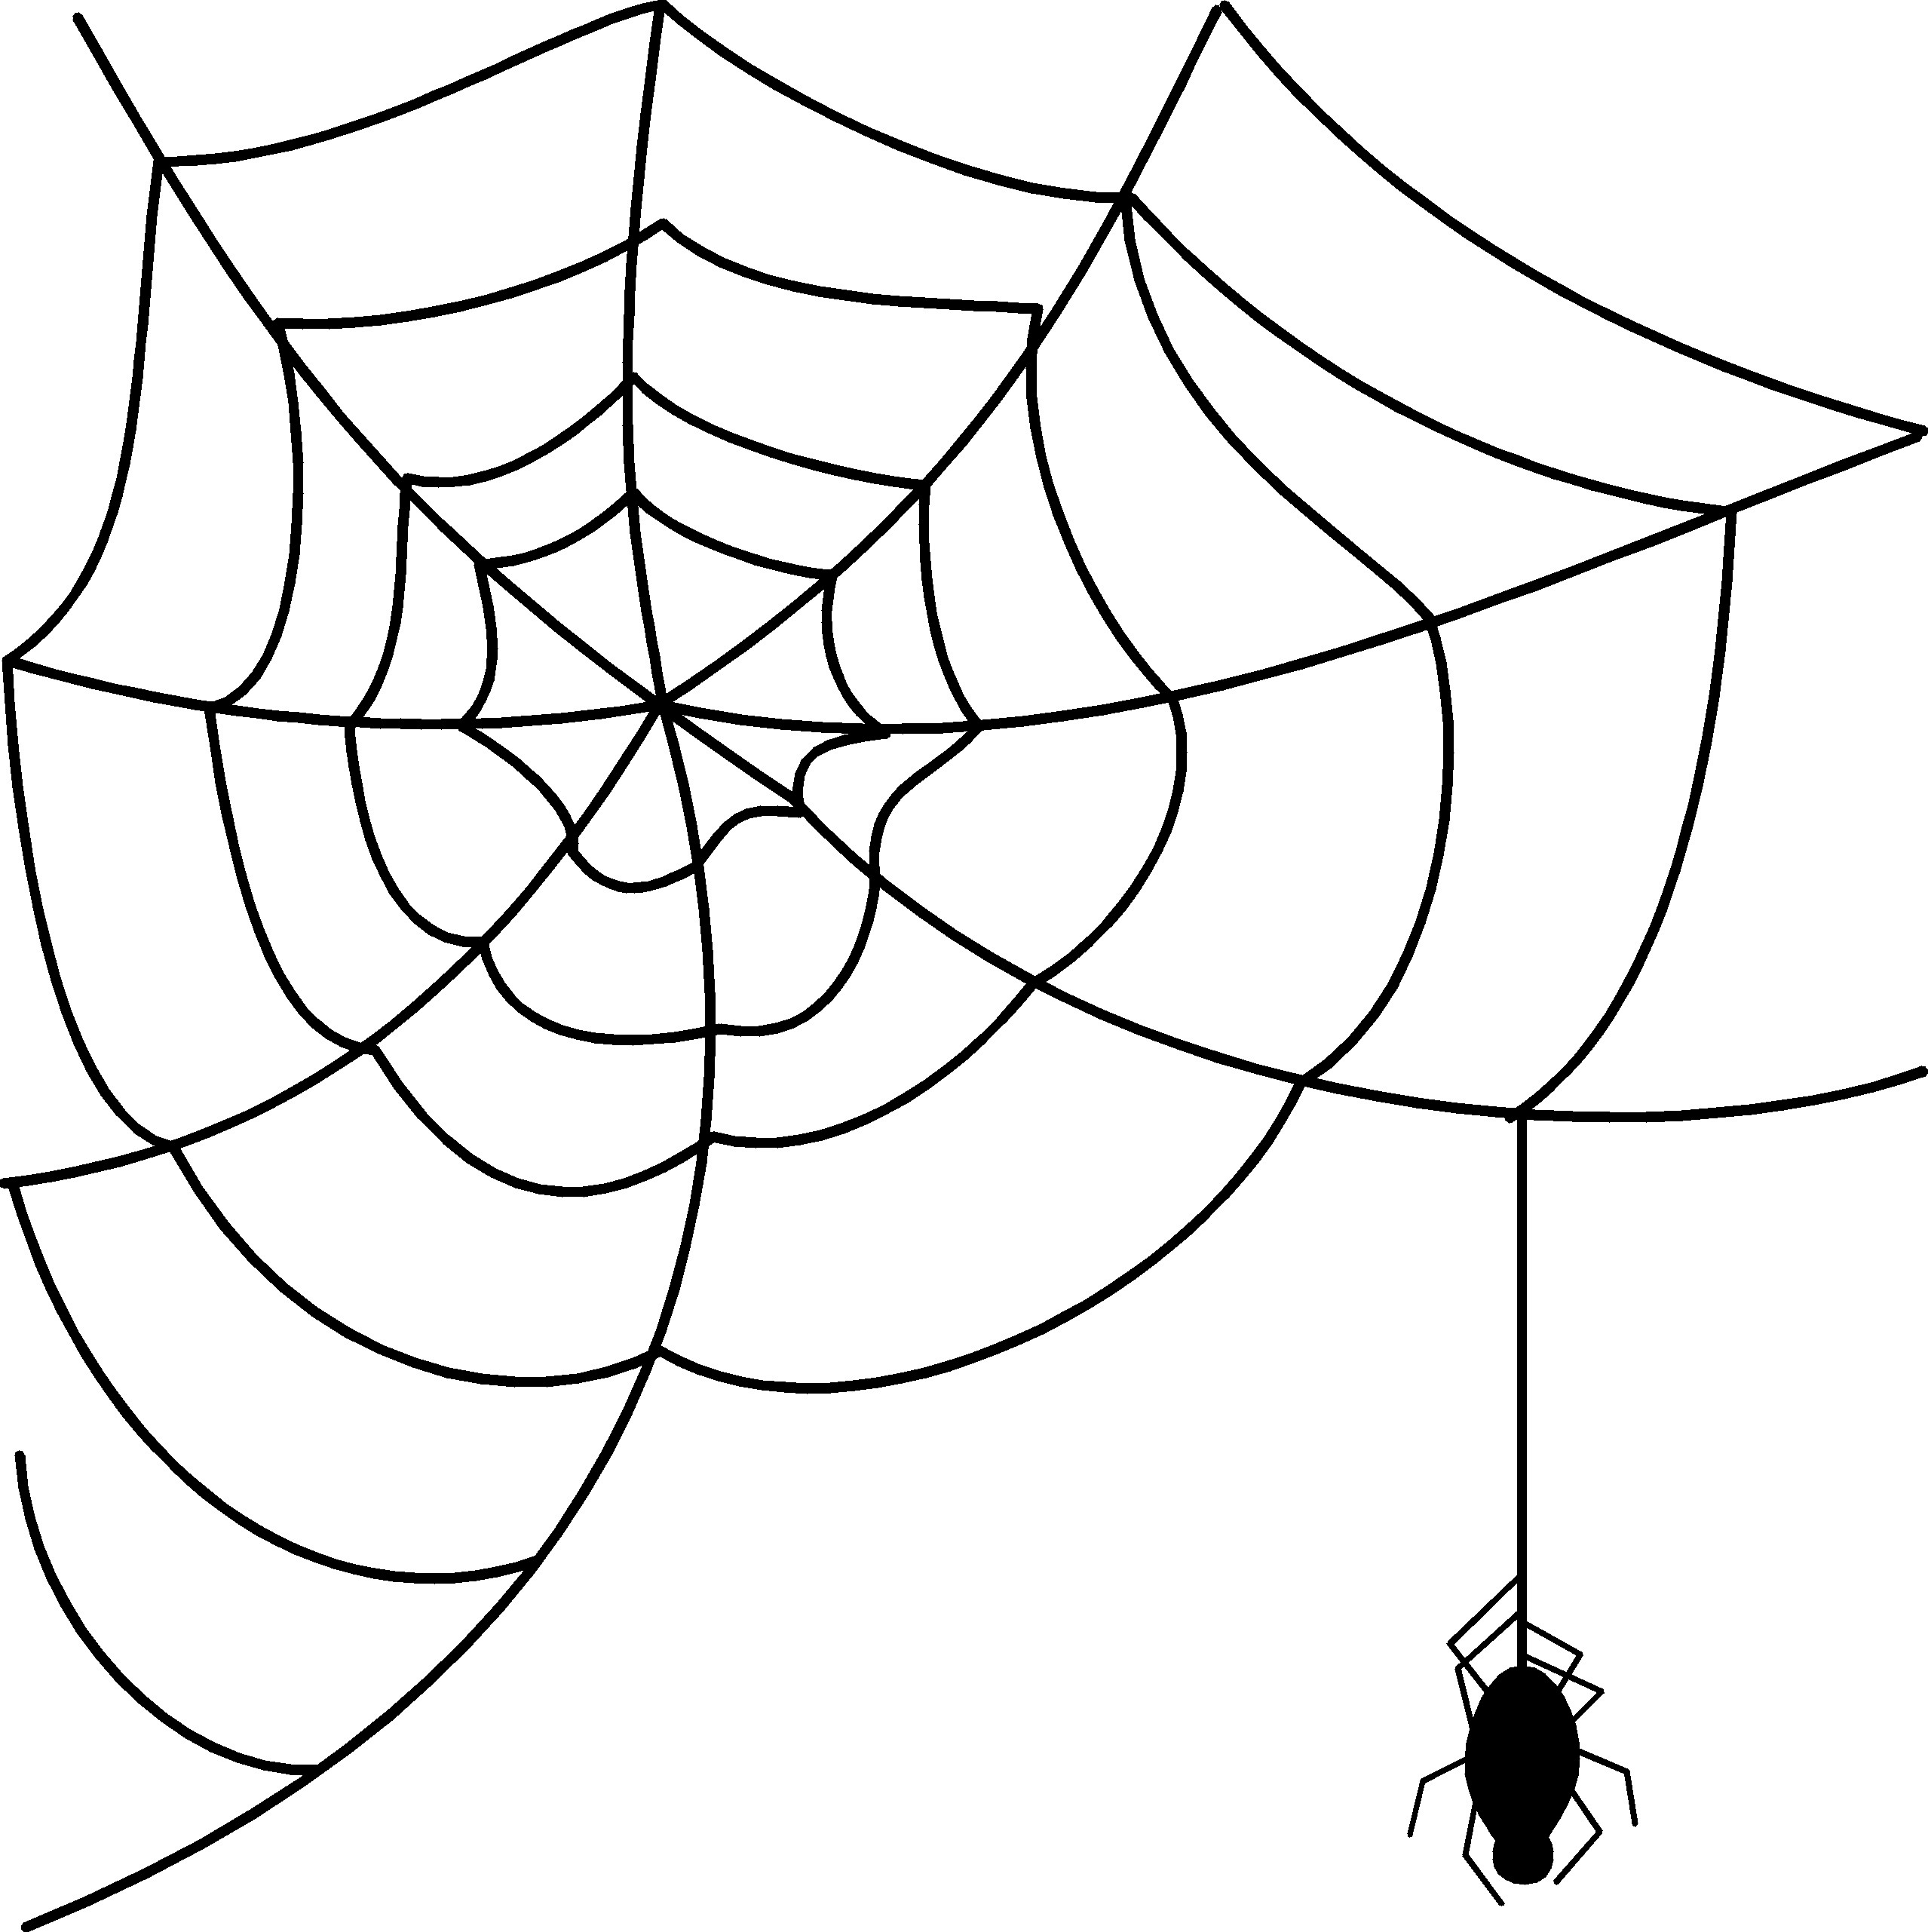 Spider web border clipart free images 6 3.